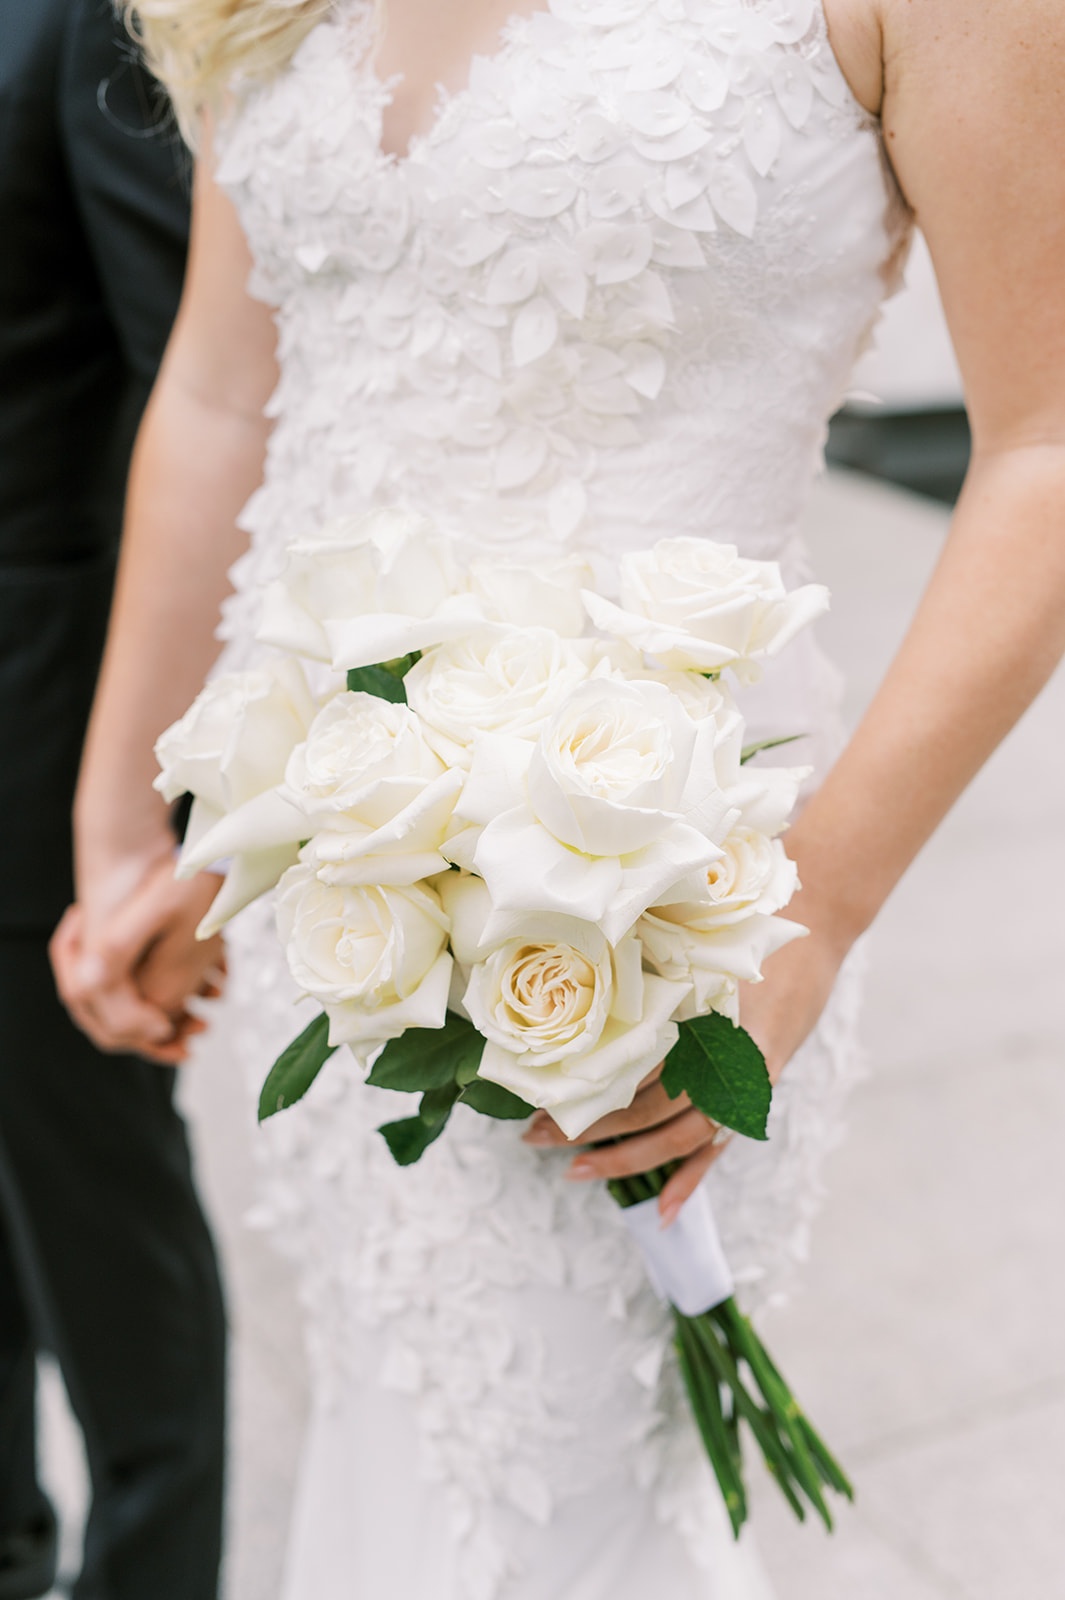 Bride holding bouquet of white long-stem roses